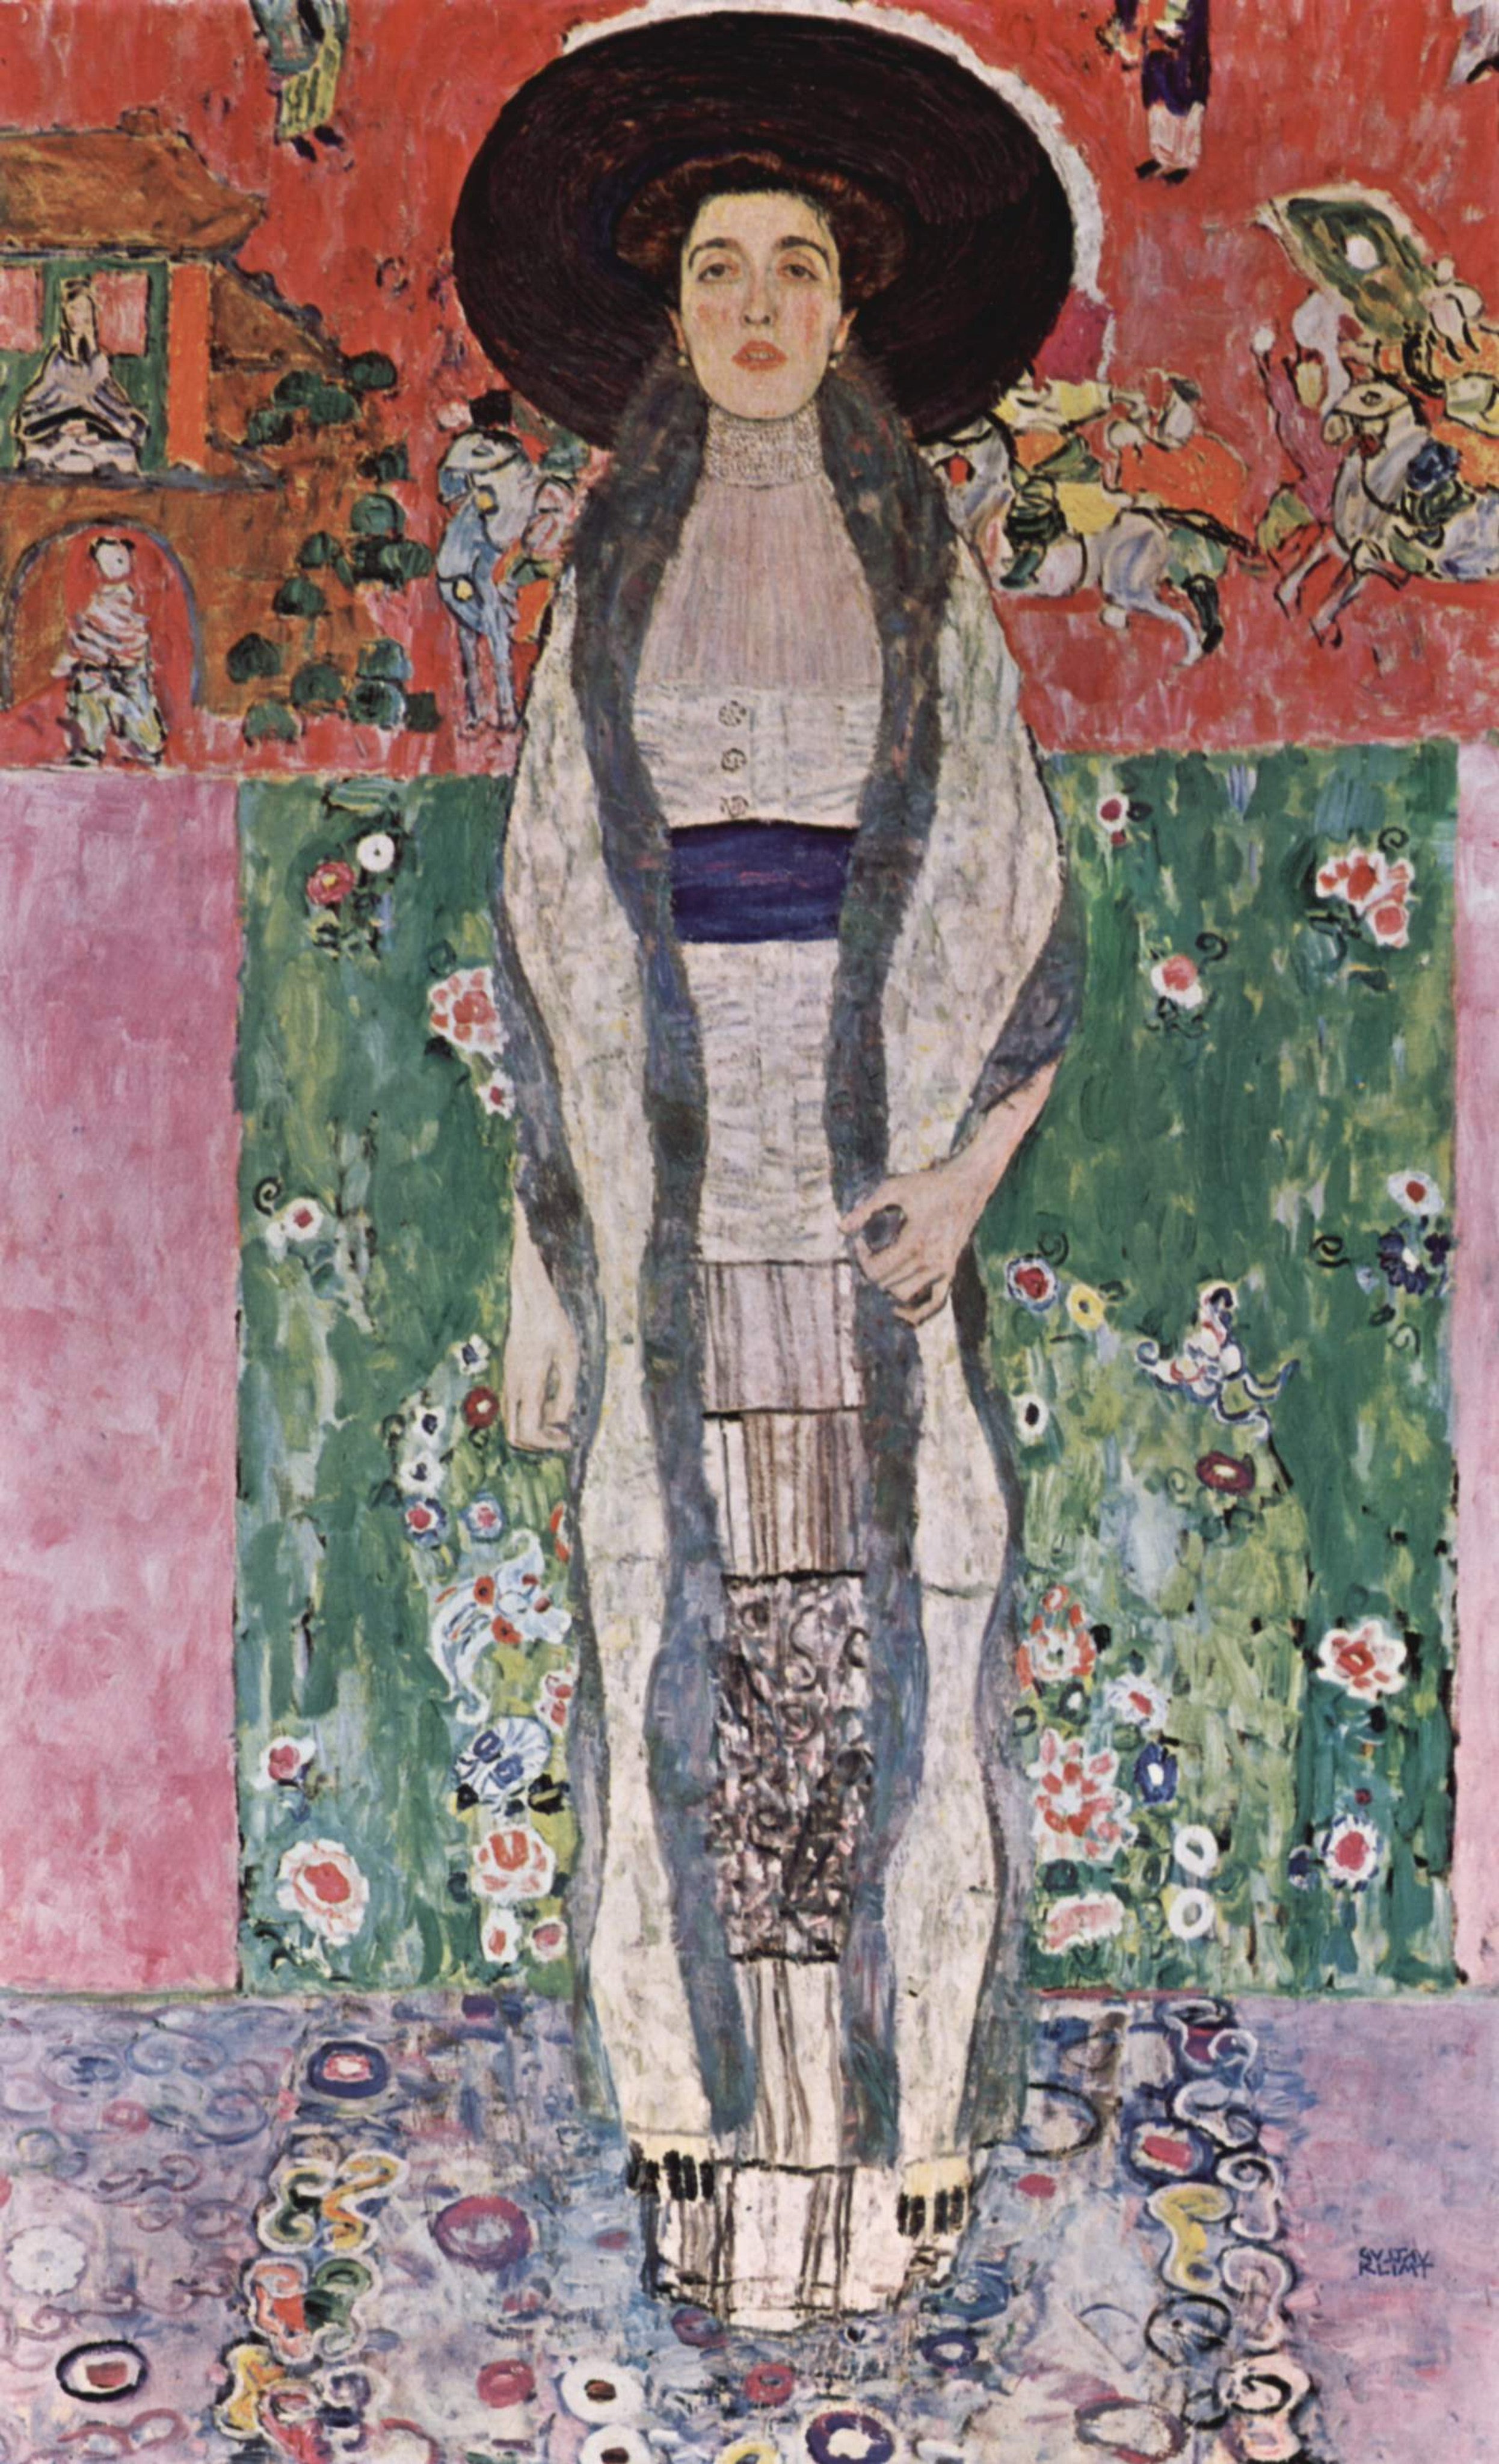 “Portrait of Adele Bloch-Bauer II” (1912) by Austrian artist Gustav Klimt, of The Kiss fame, recently resurfaced at an exhibition at Amsterdam’s Van Gogh Museum after being sold to an anonymous Chinese buyer in 2017. 